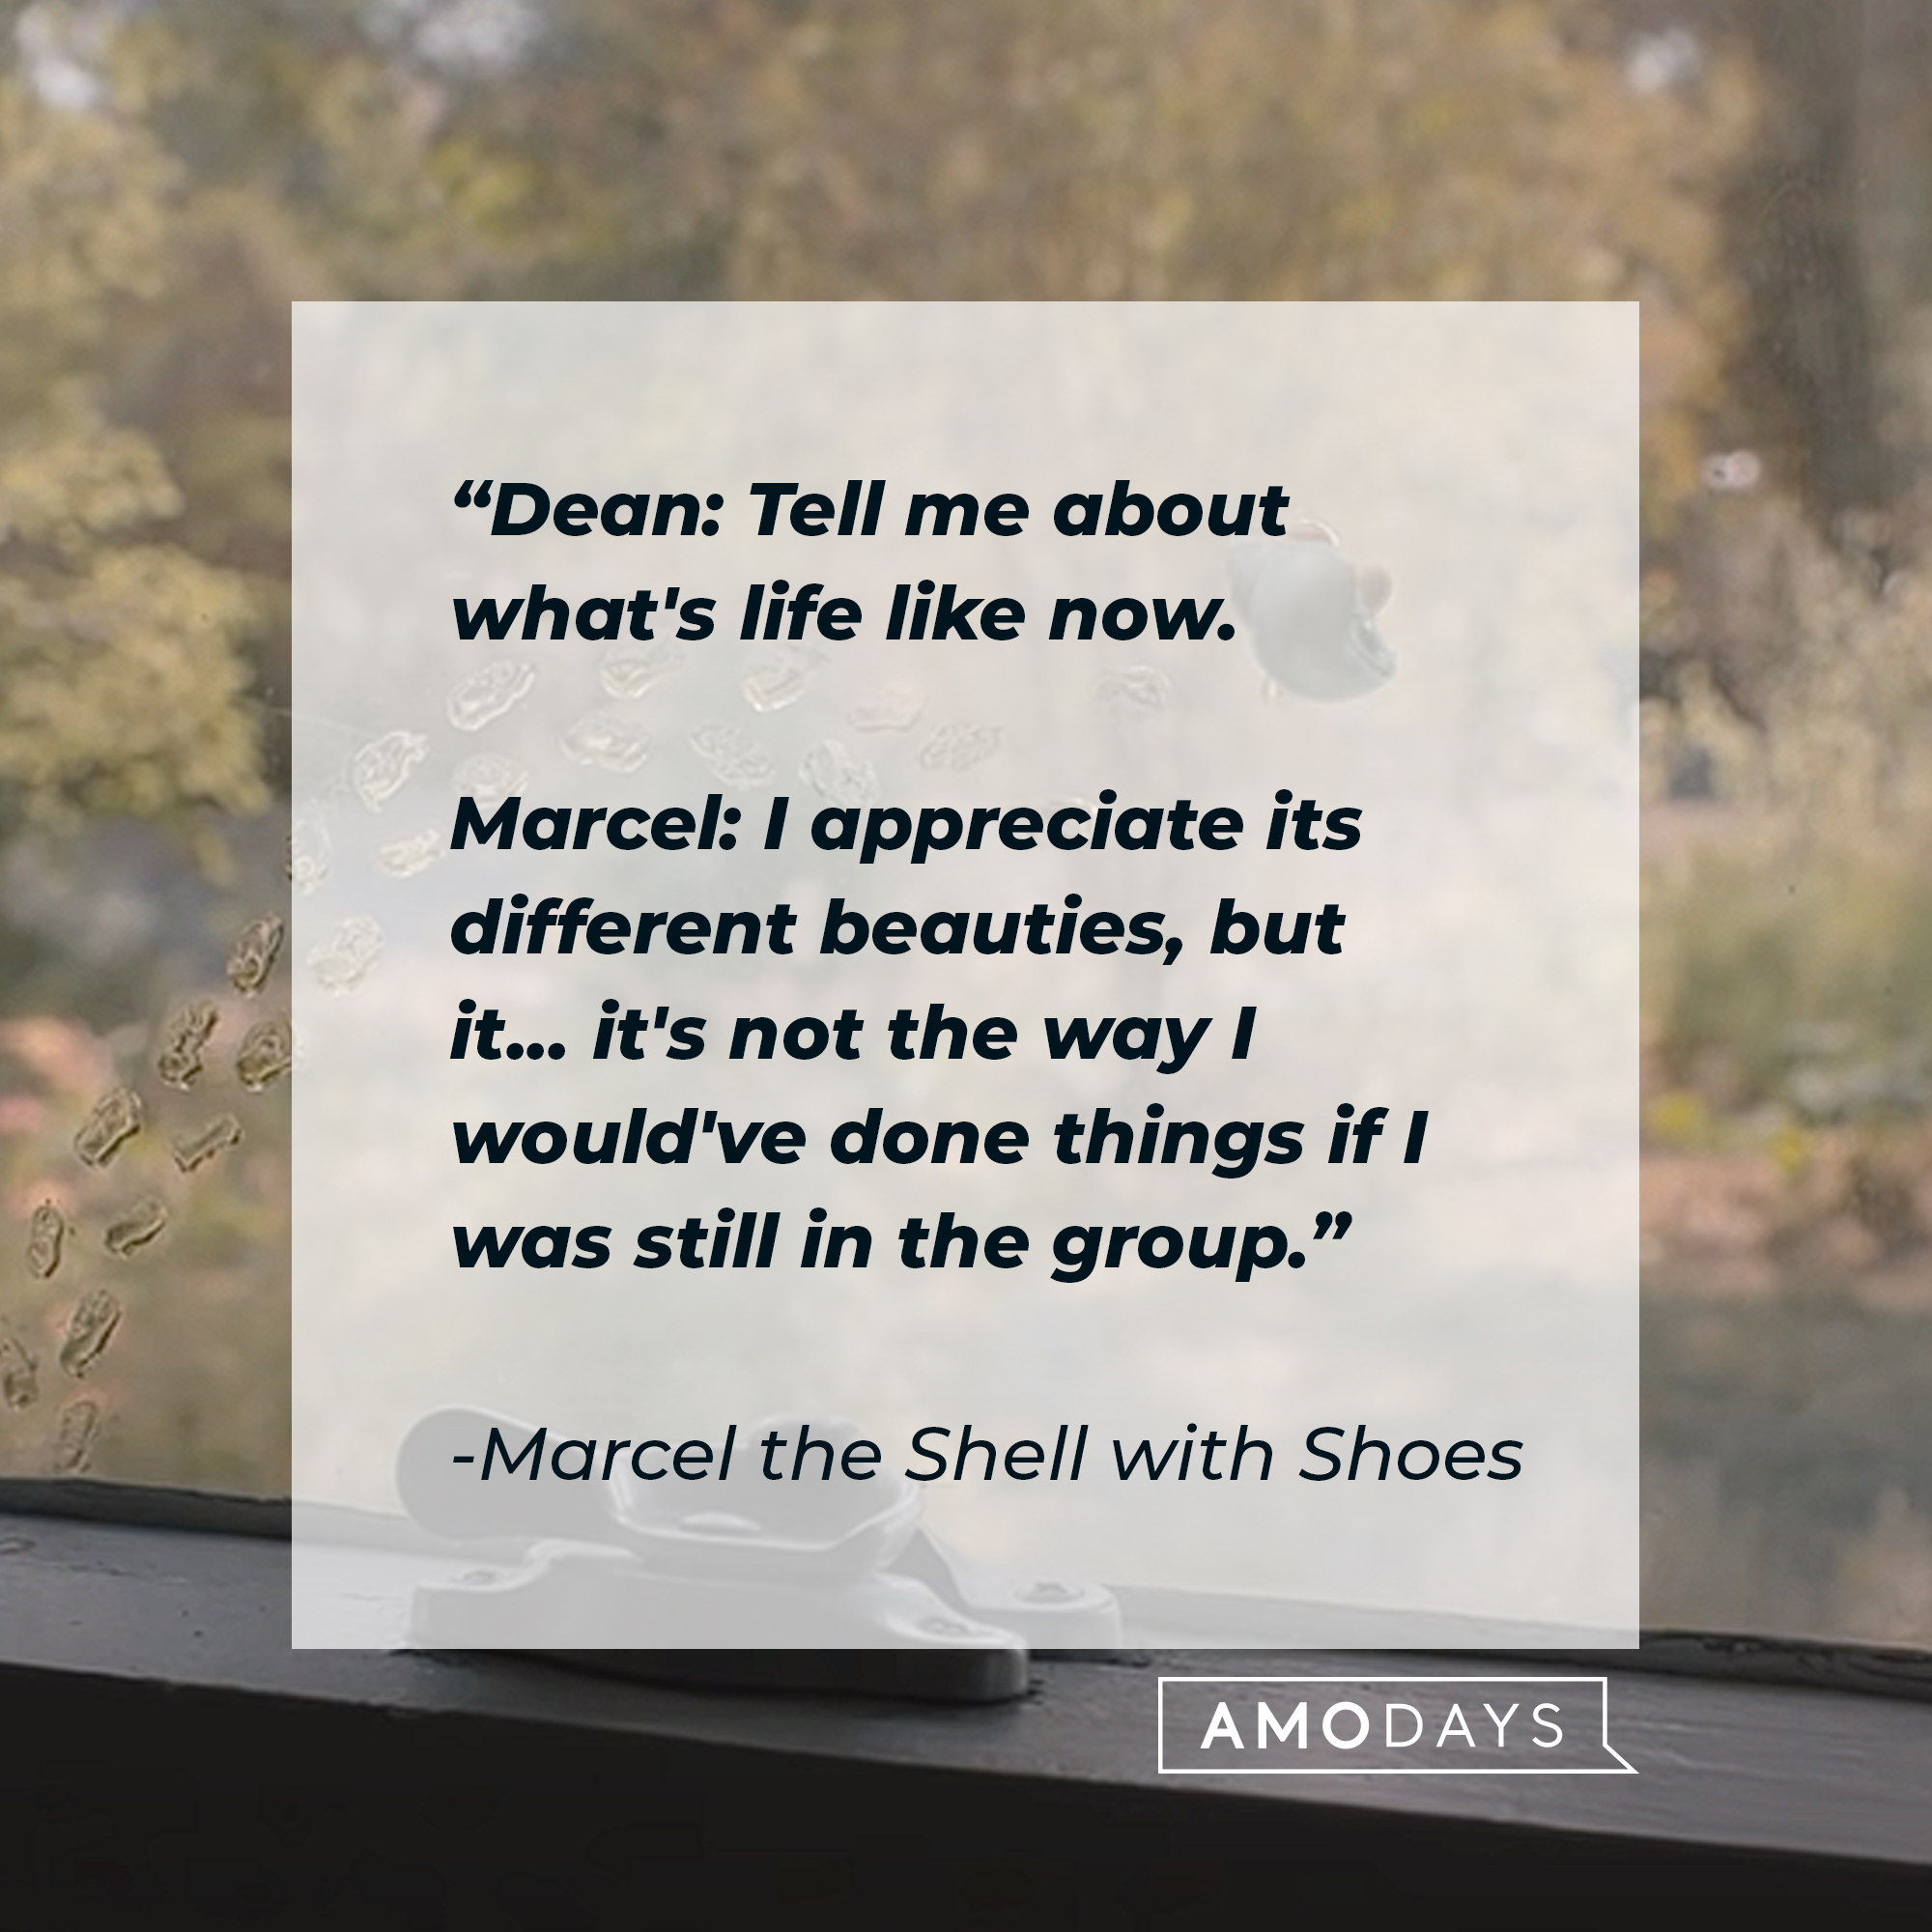 "Marcel the Shell with Shoes on" quote: “Dean: Tell me about what's life like now. Marcel: I appreciate its different beauties, but it... it's not the way I would've done things if I was still in the group.” | Source: youtube.com/A24